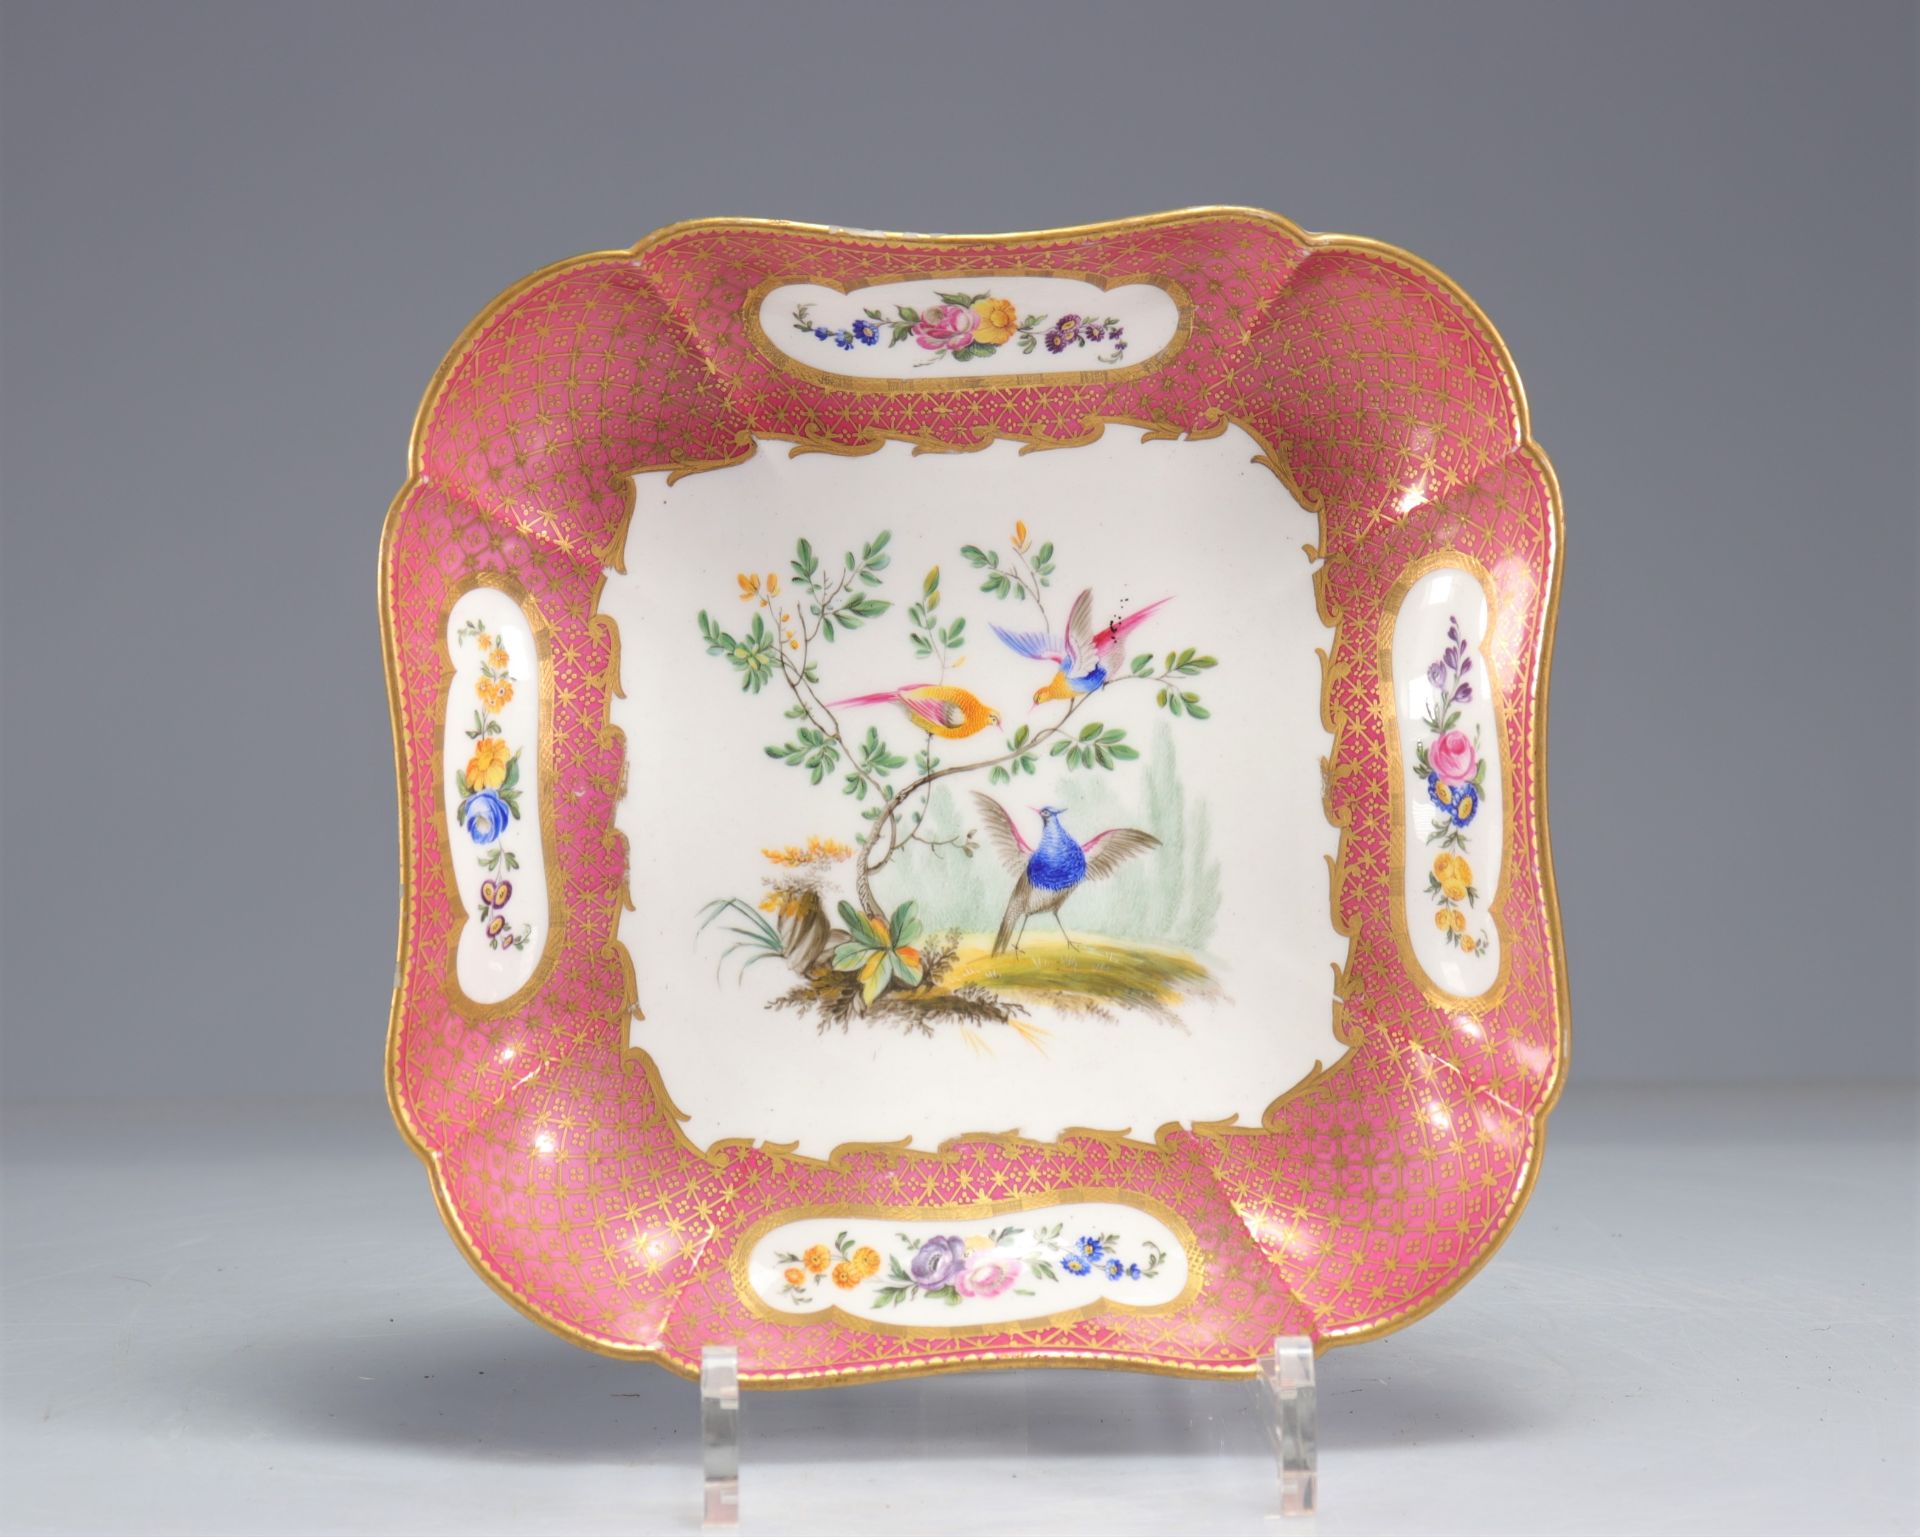 Pair of Sevres porcelain dishes decorated with birds and flowers, mark of 1761 - Image 2 of 5